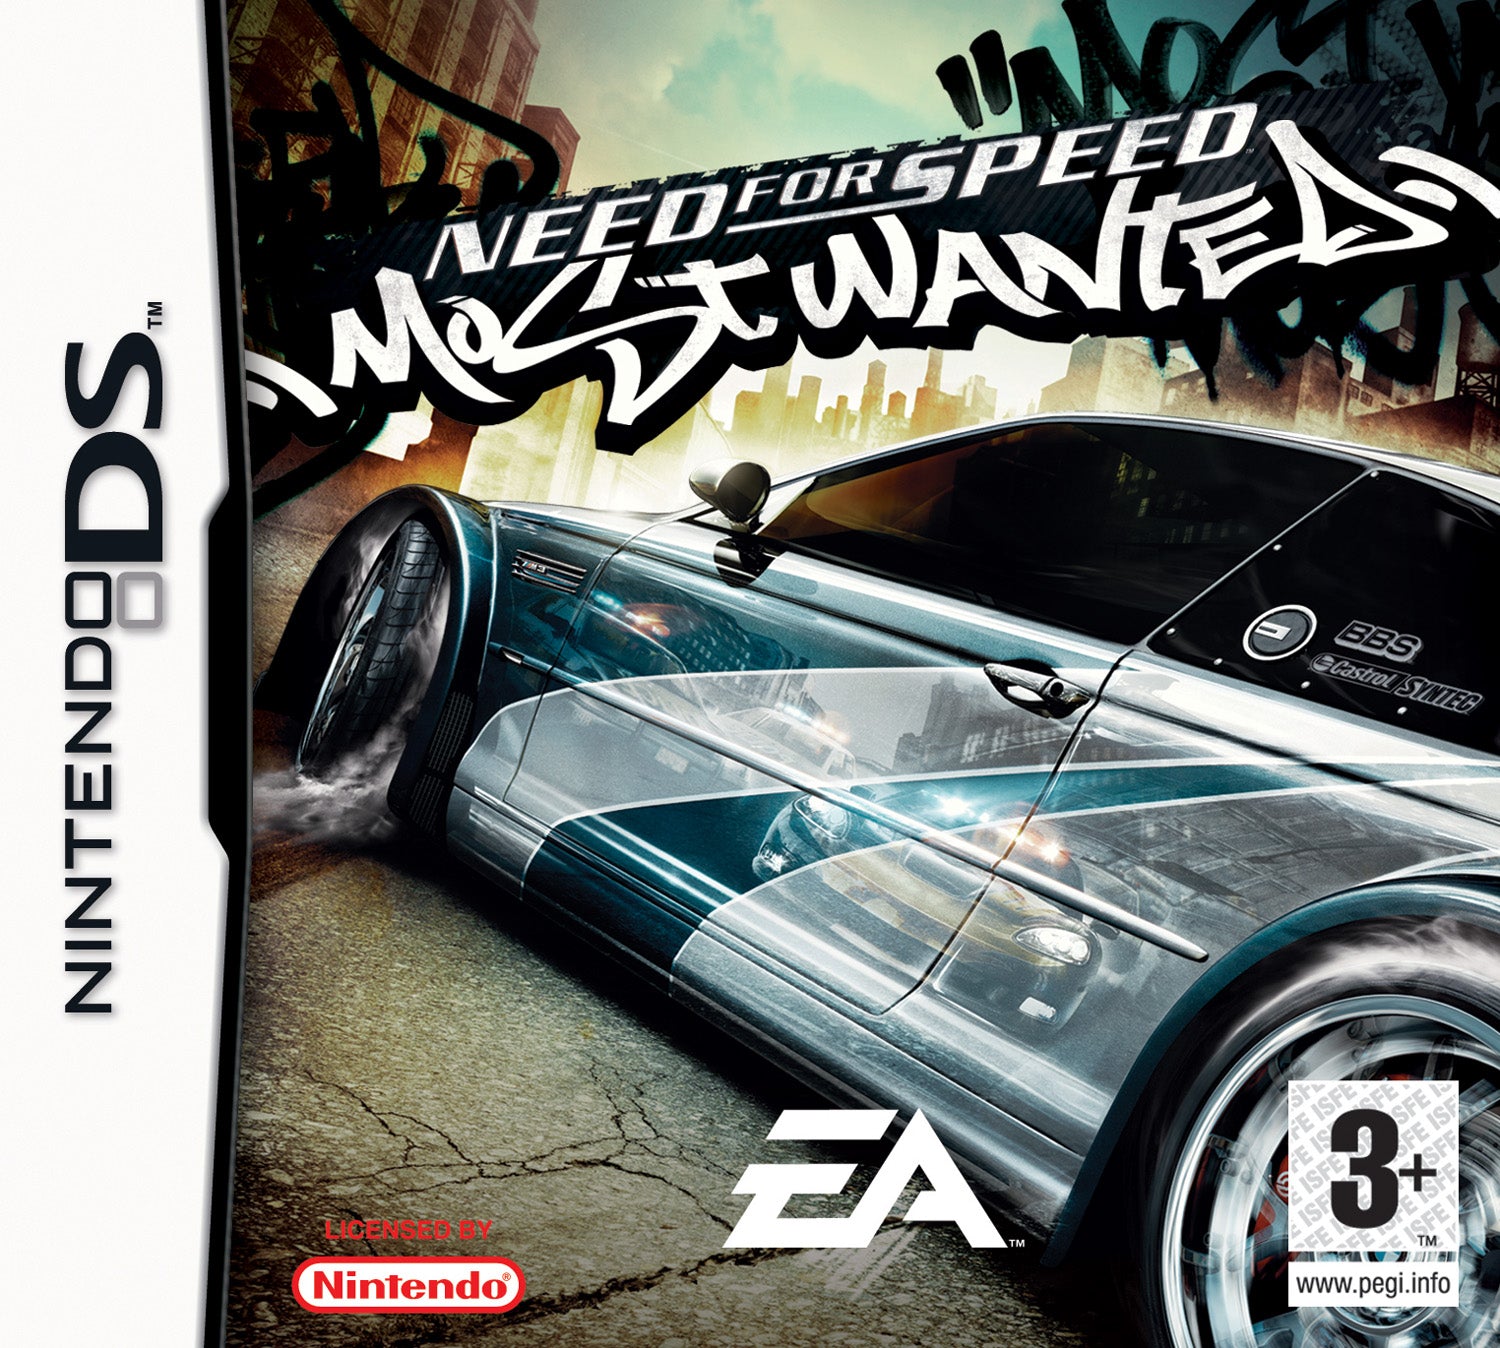 Game | Nintendo DS | Need For Speed Most Wanted